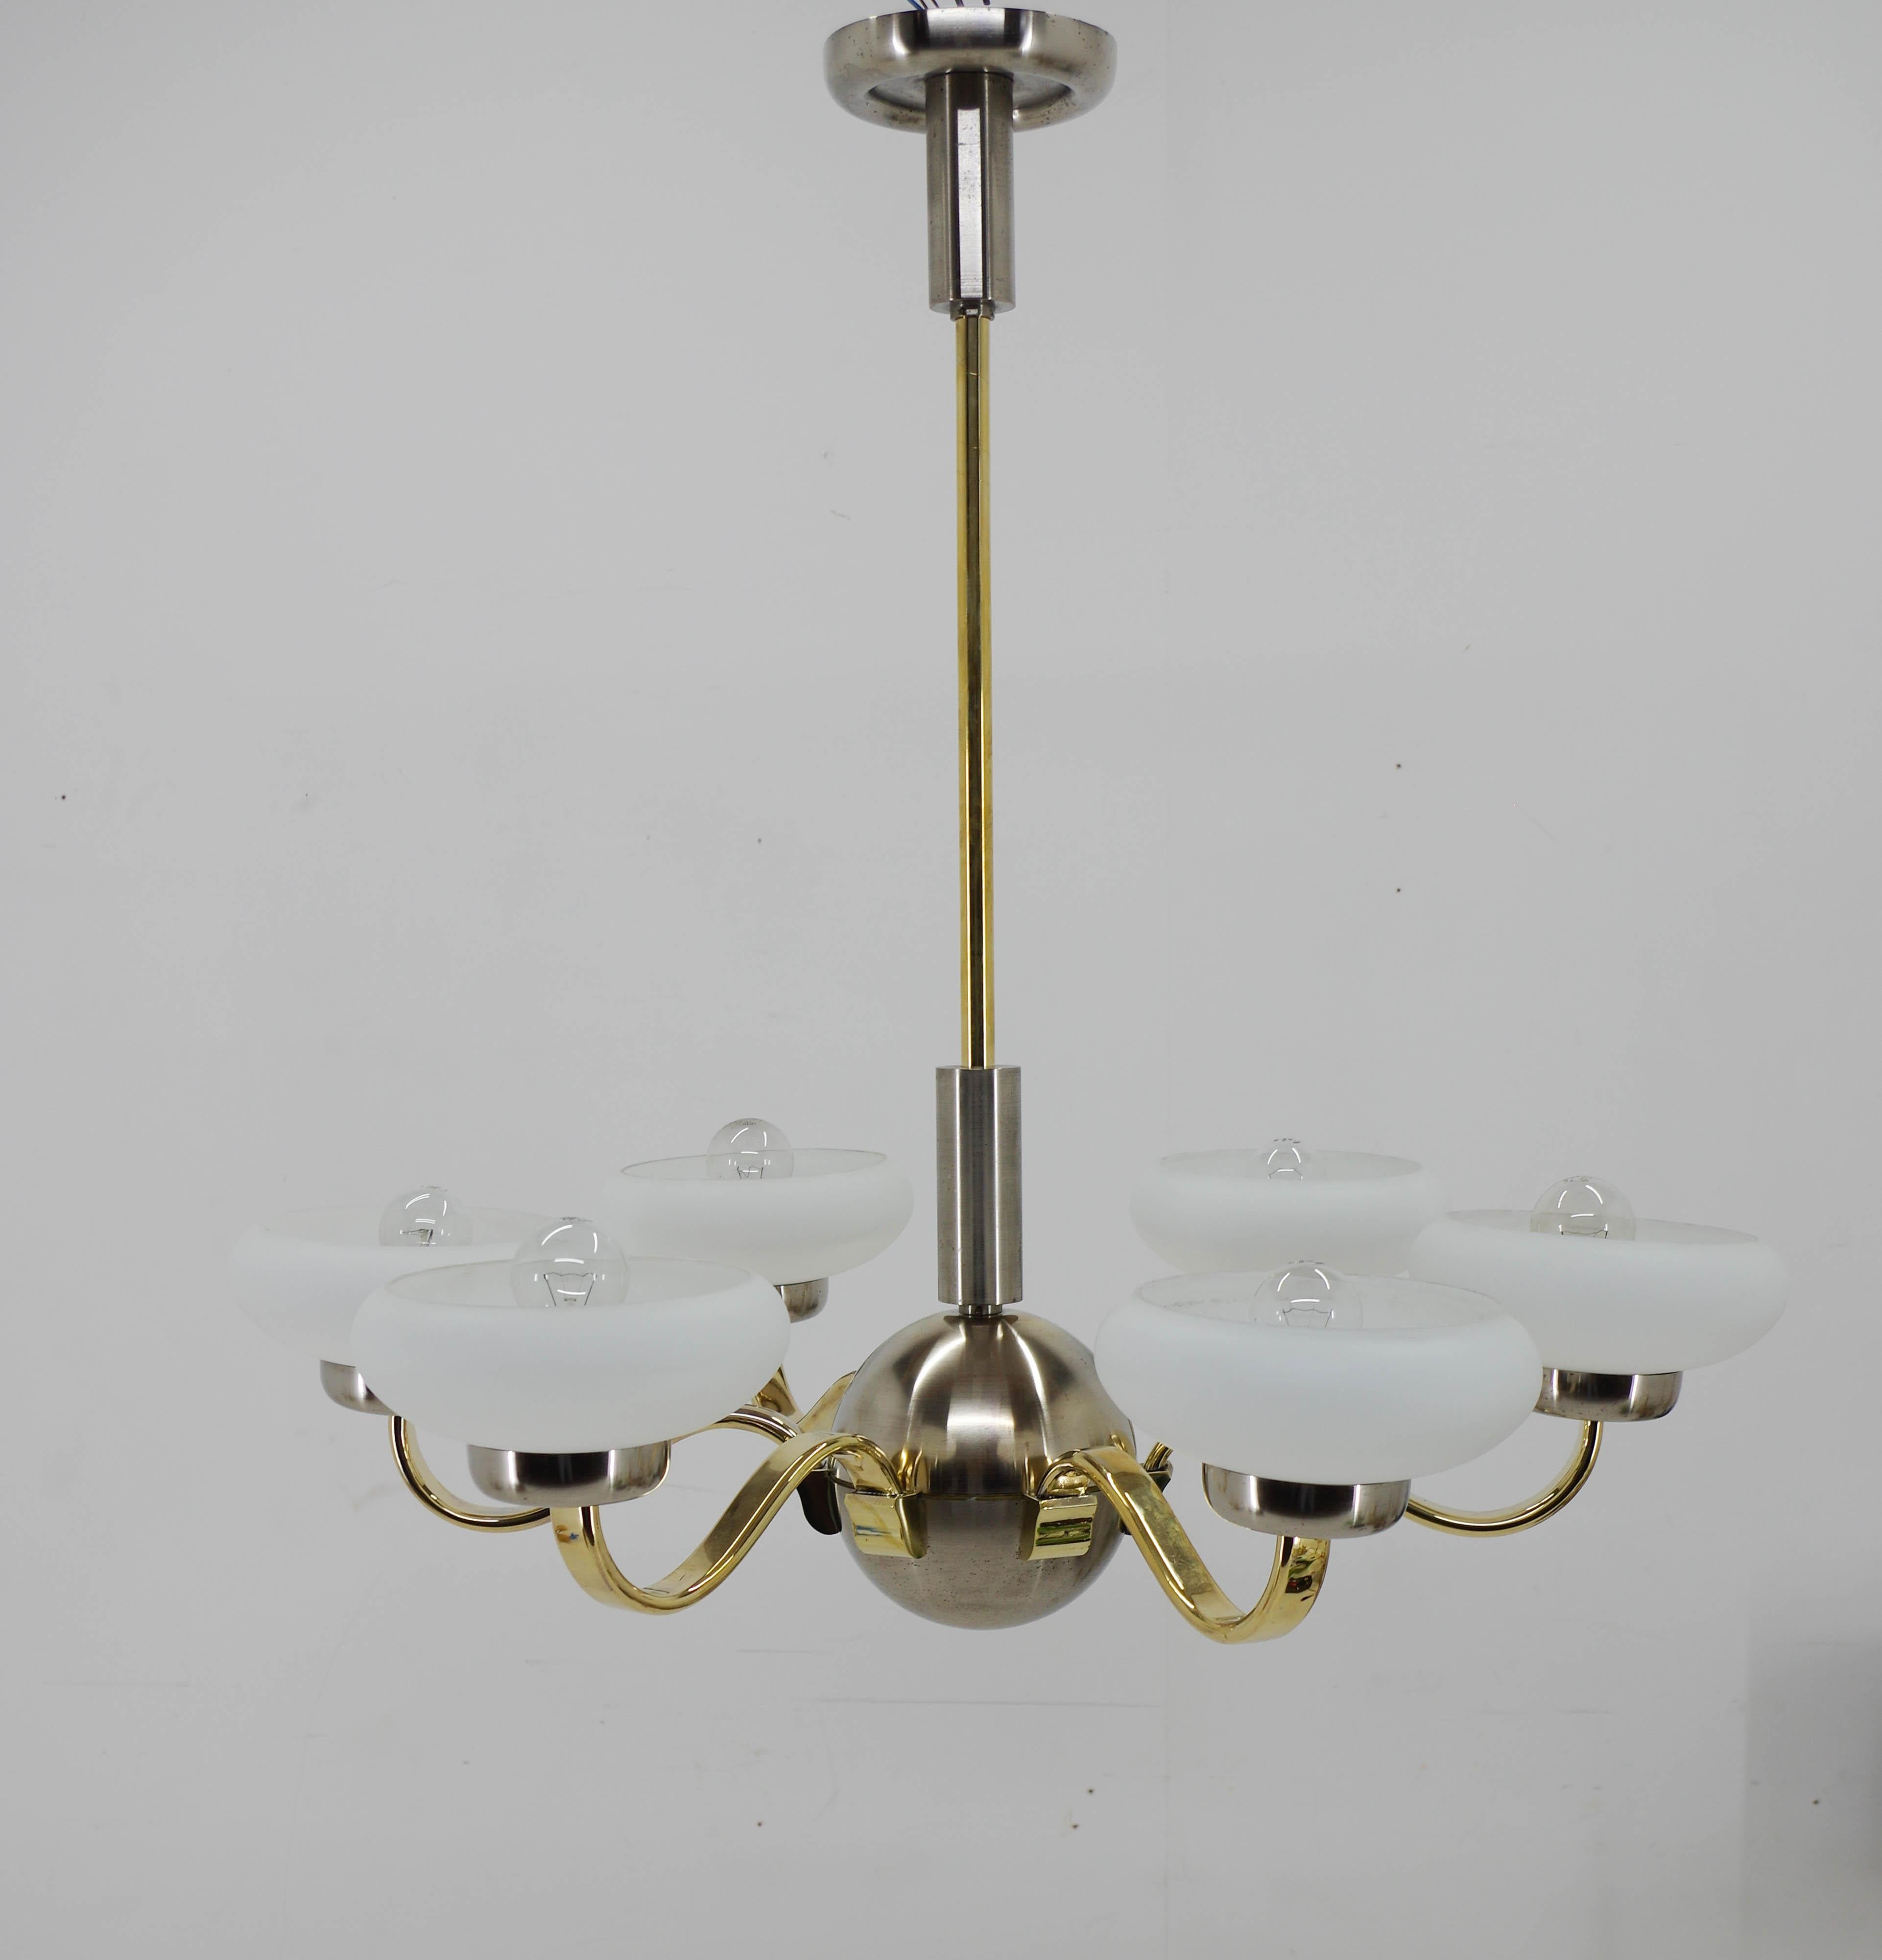 Large beautiful Art Deco chandelier made in 1930s.
Restored: nickel with minor age patina polished. Brass arms polished. Rewired: two separate circuits - 3+3x60W, E25-E27 bulbs
US wiring compatible